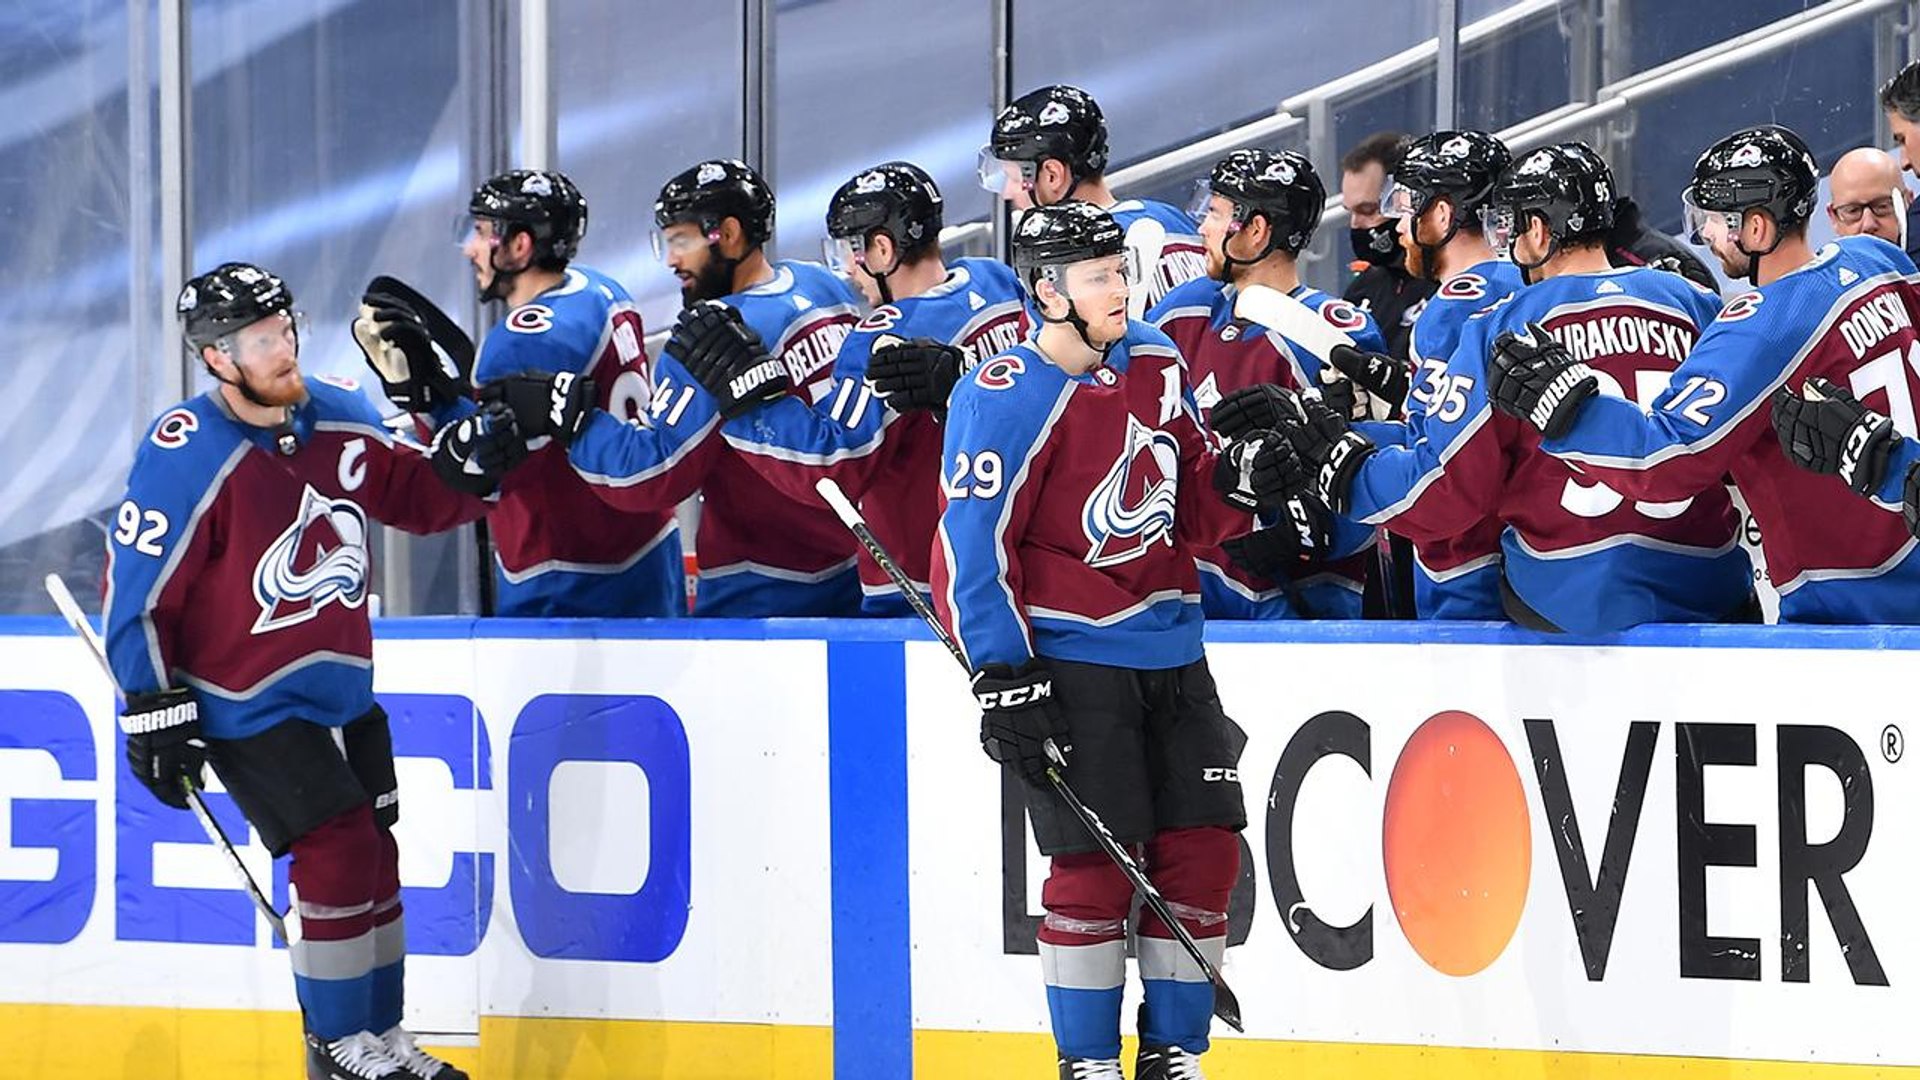 NHL highlights: Nathan MacKinnon scored twice in OT to beat the Jets 